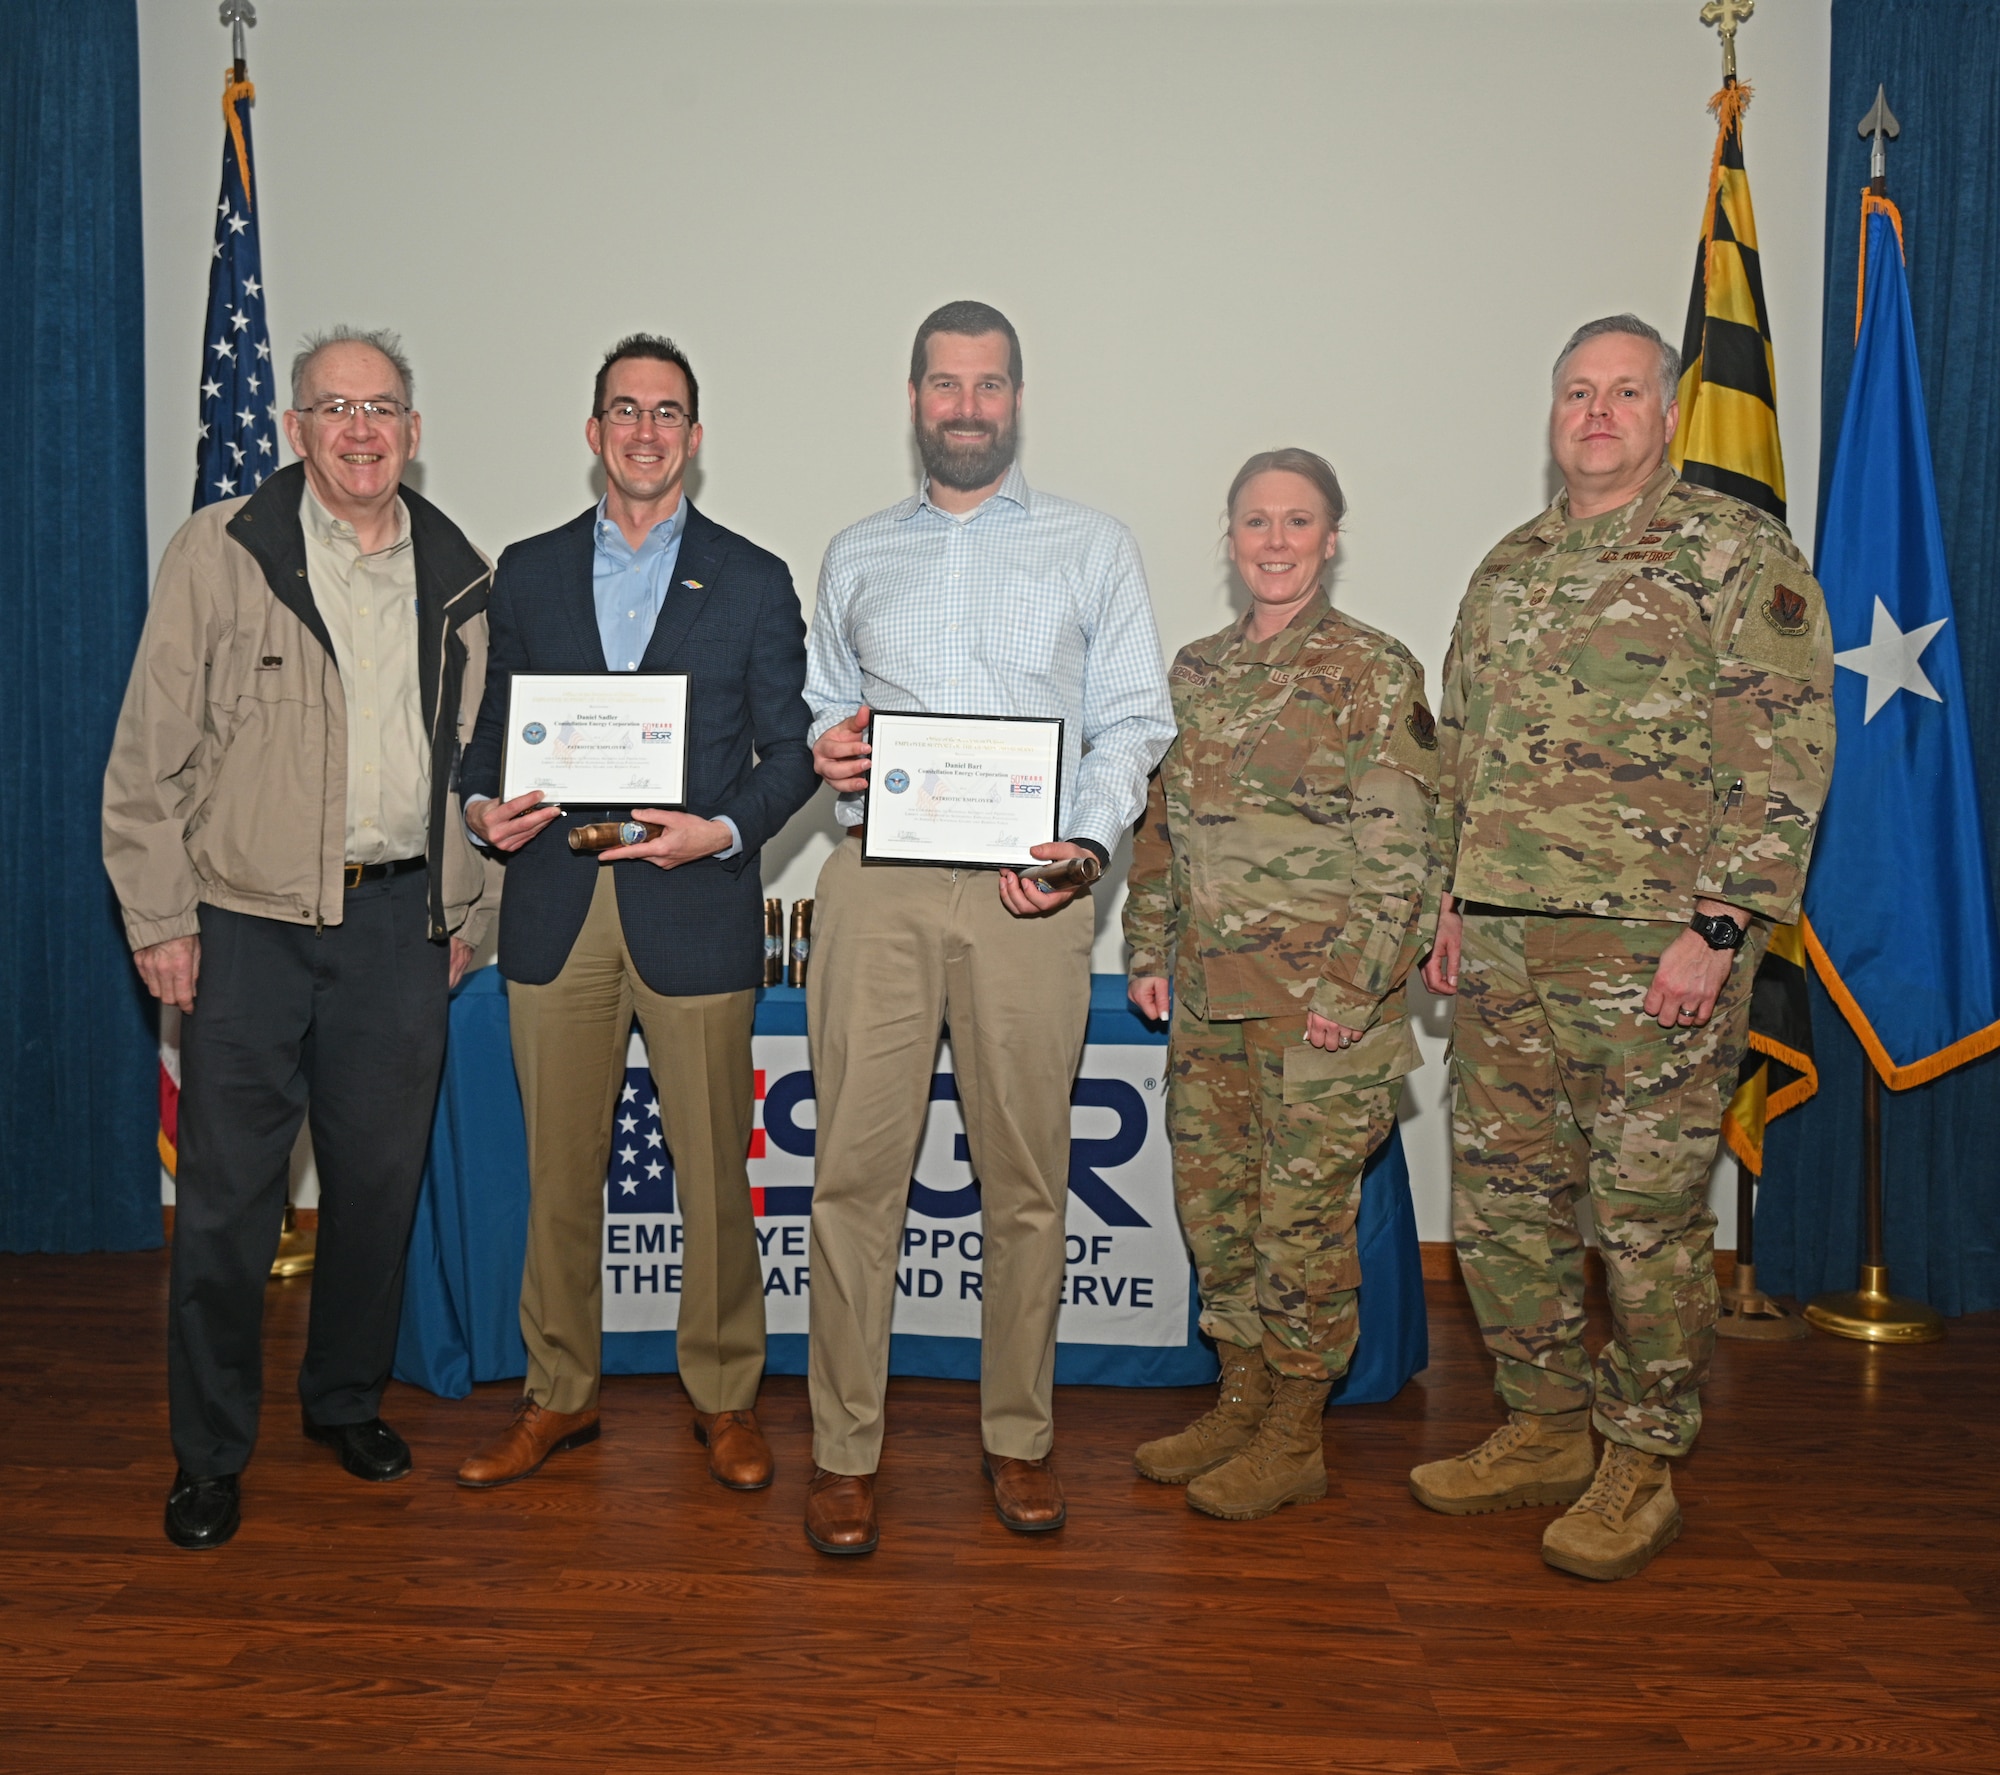 U.S. Air Force Brig. Gen. Jori Robinson (2nd from right), 175th Wing commander, and U.S. Air Force Senior Master Sgt. Scott Howe (right), 275th Cyberspace Operations Squadron, present the Patriot Award to Howe's civilian employers at Martin State Air National Guard Base, Middle River, Md., March 24, 2023.